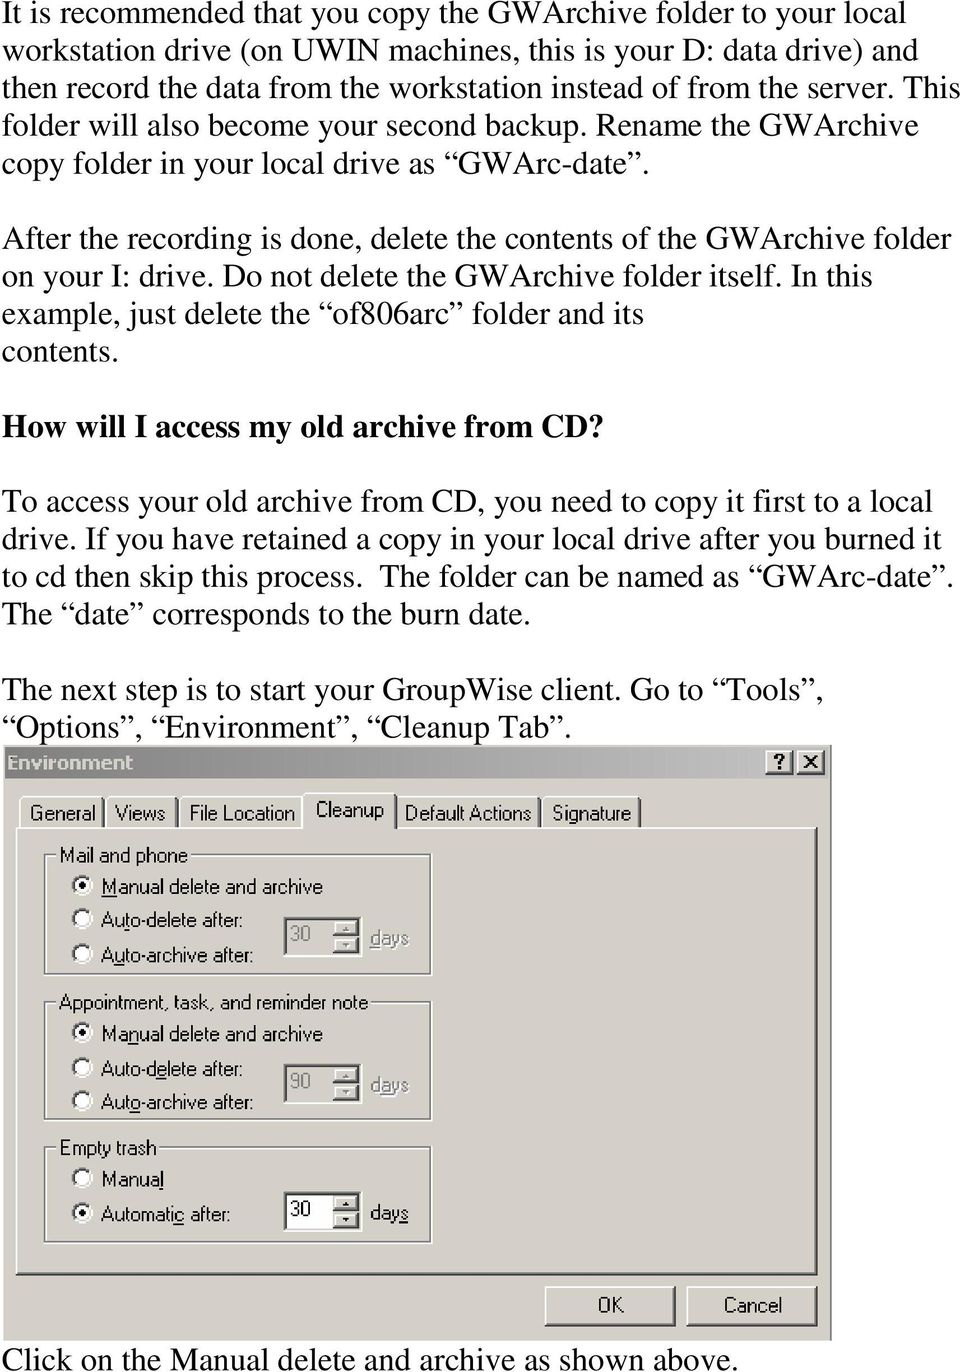 After the recording is done, delete the contents of the GWArchive folder on your I: drive. Do not delete the GWArchive folder itself. In this example, just delete the of806arc folder and its contents.